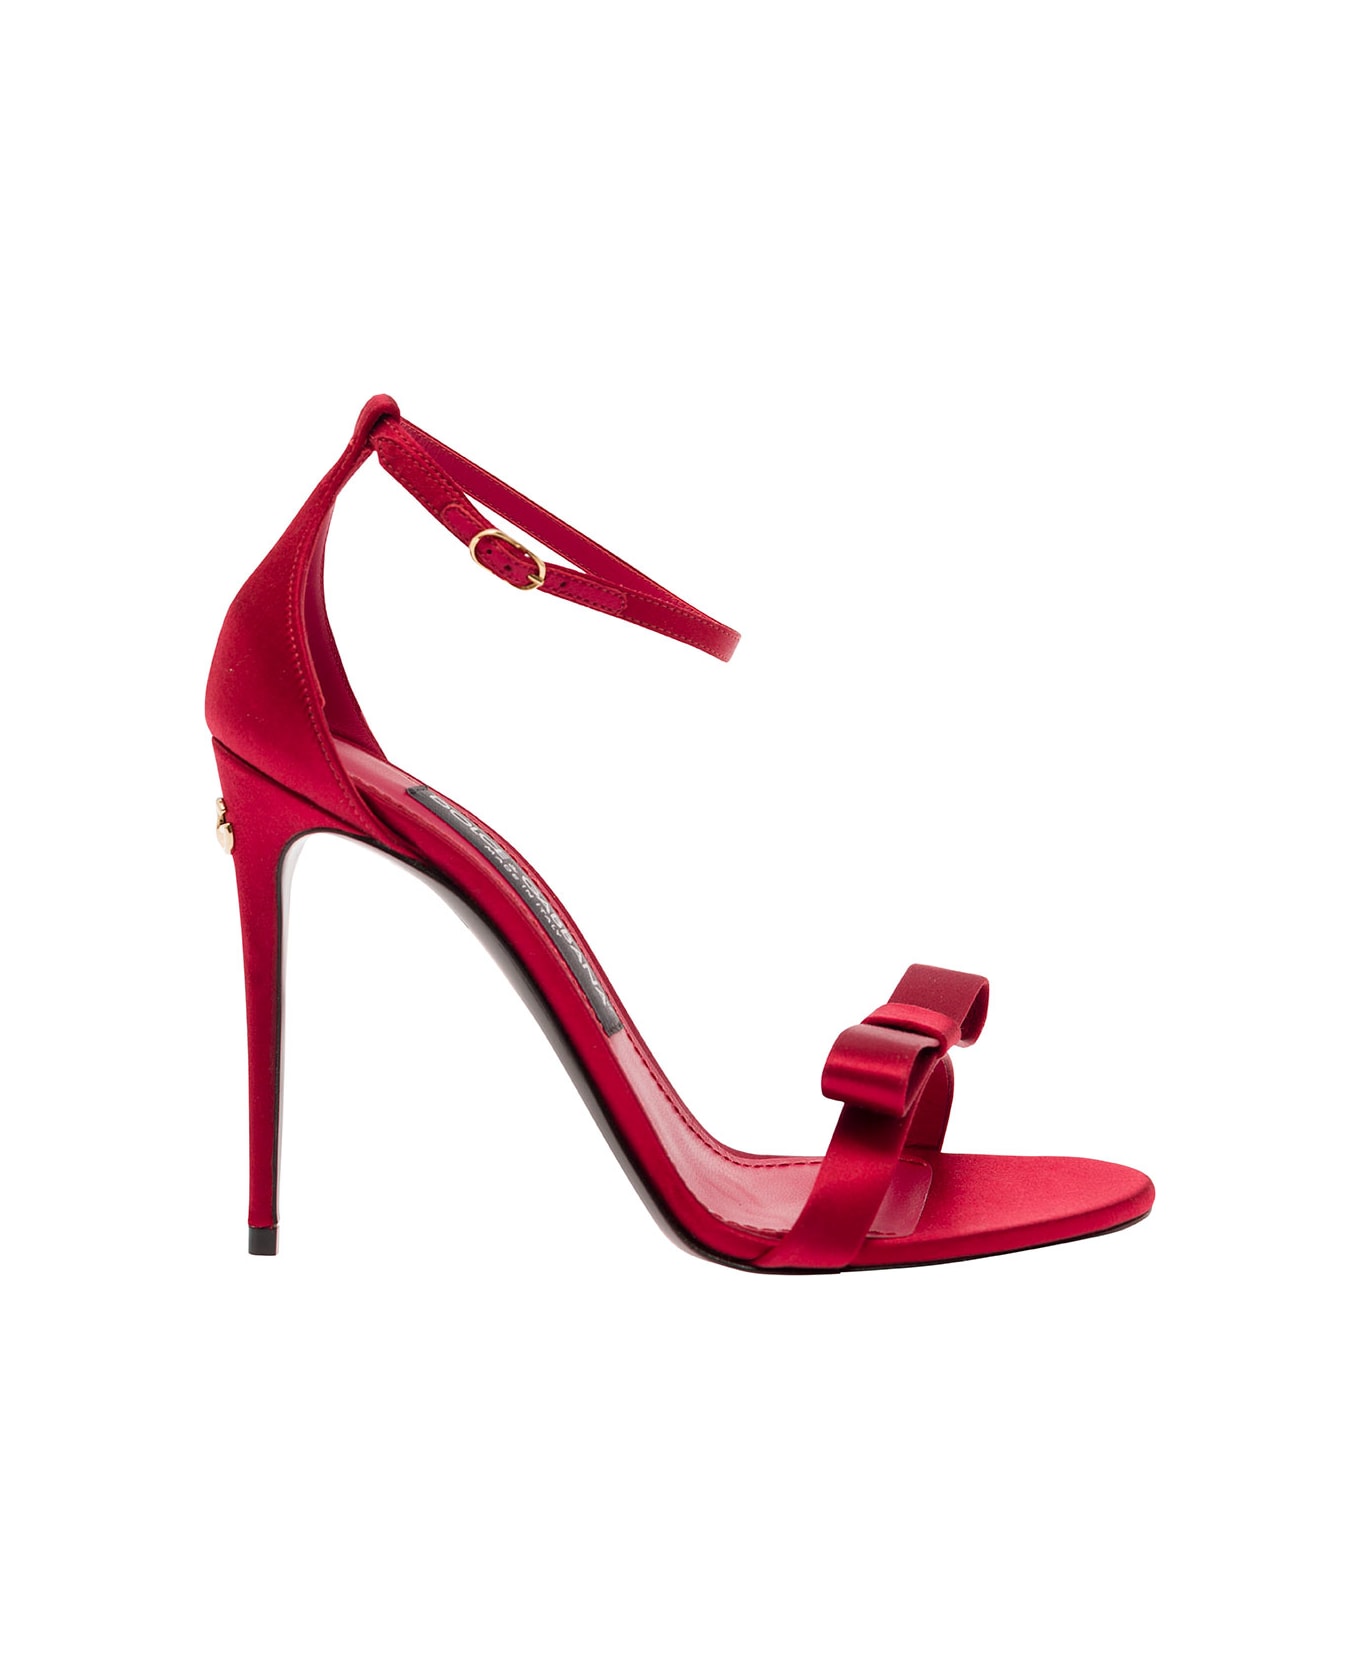 Dolce & Gabbana Red Sandals With Bow And Logo Detail In Satin Woman - Red